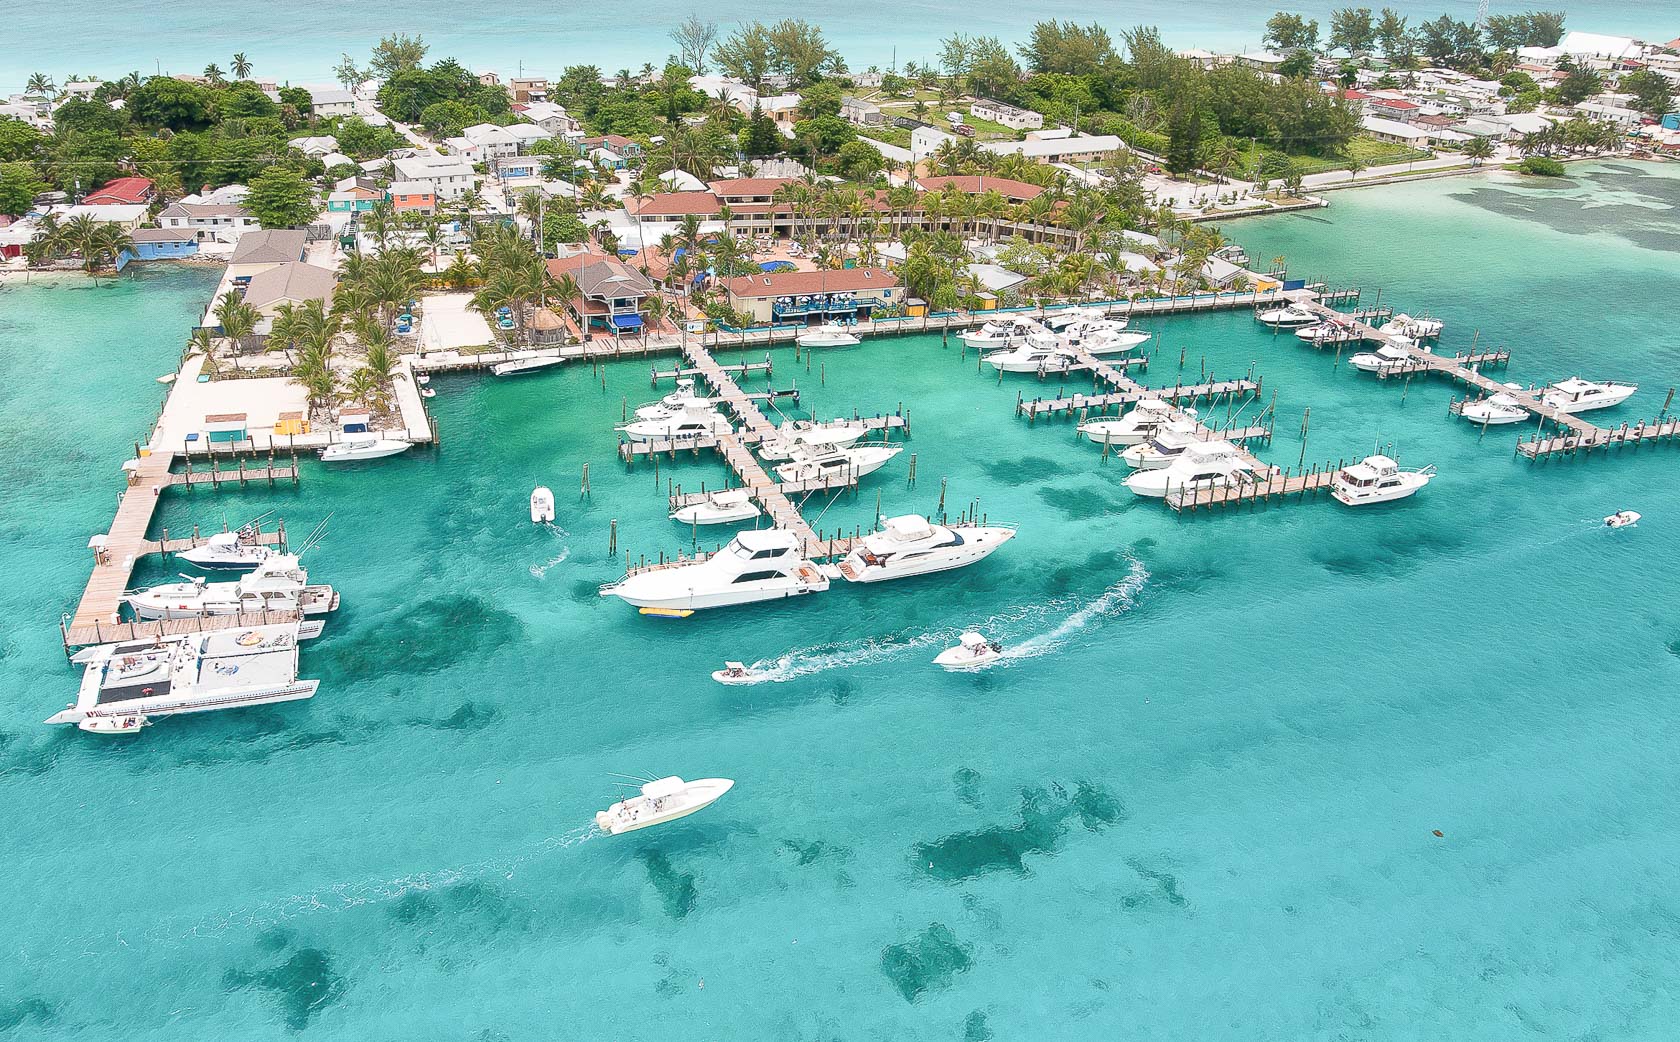 Aerial view of boat marina on a narrow strip of land with small buildings, palm trees and white sand beaches with crystal clear turquoise ocean